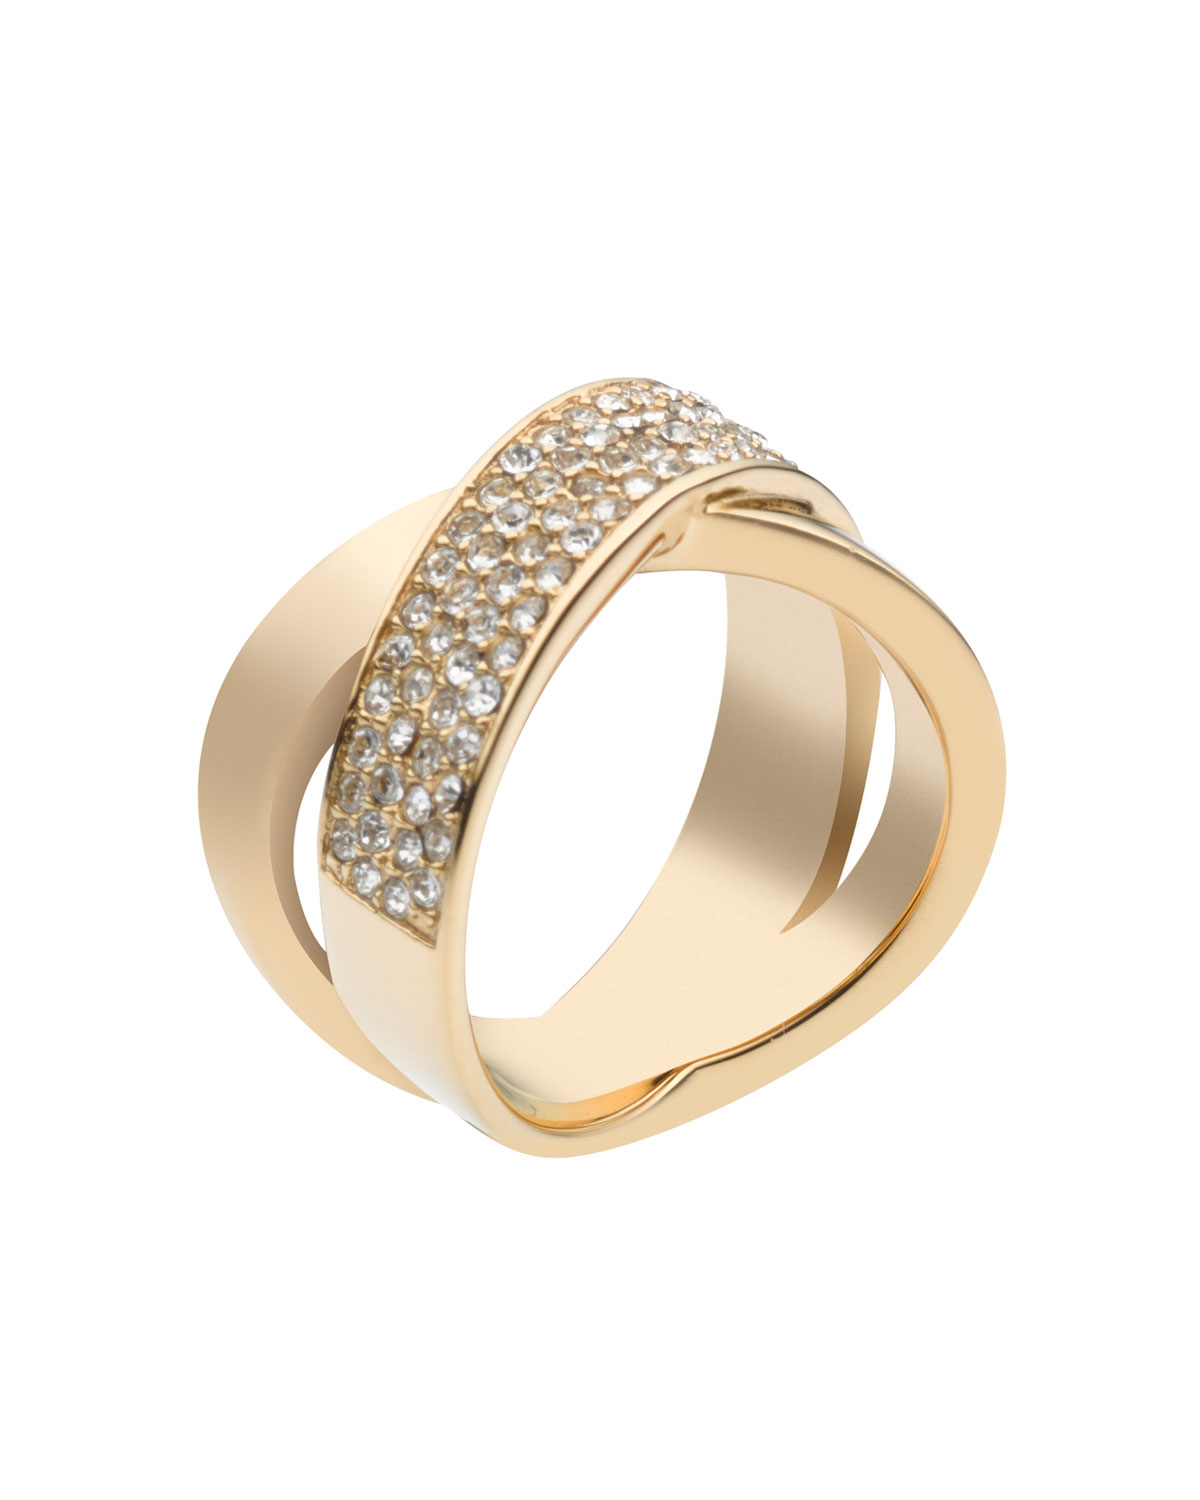 Michael Kors Pave Crystal X Ring Golden in Gold